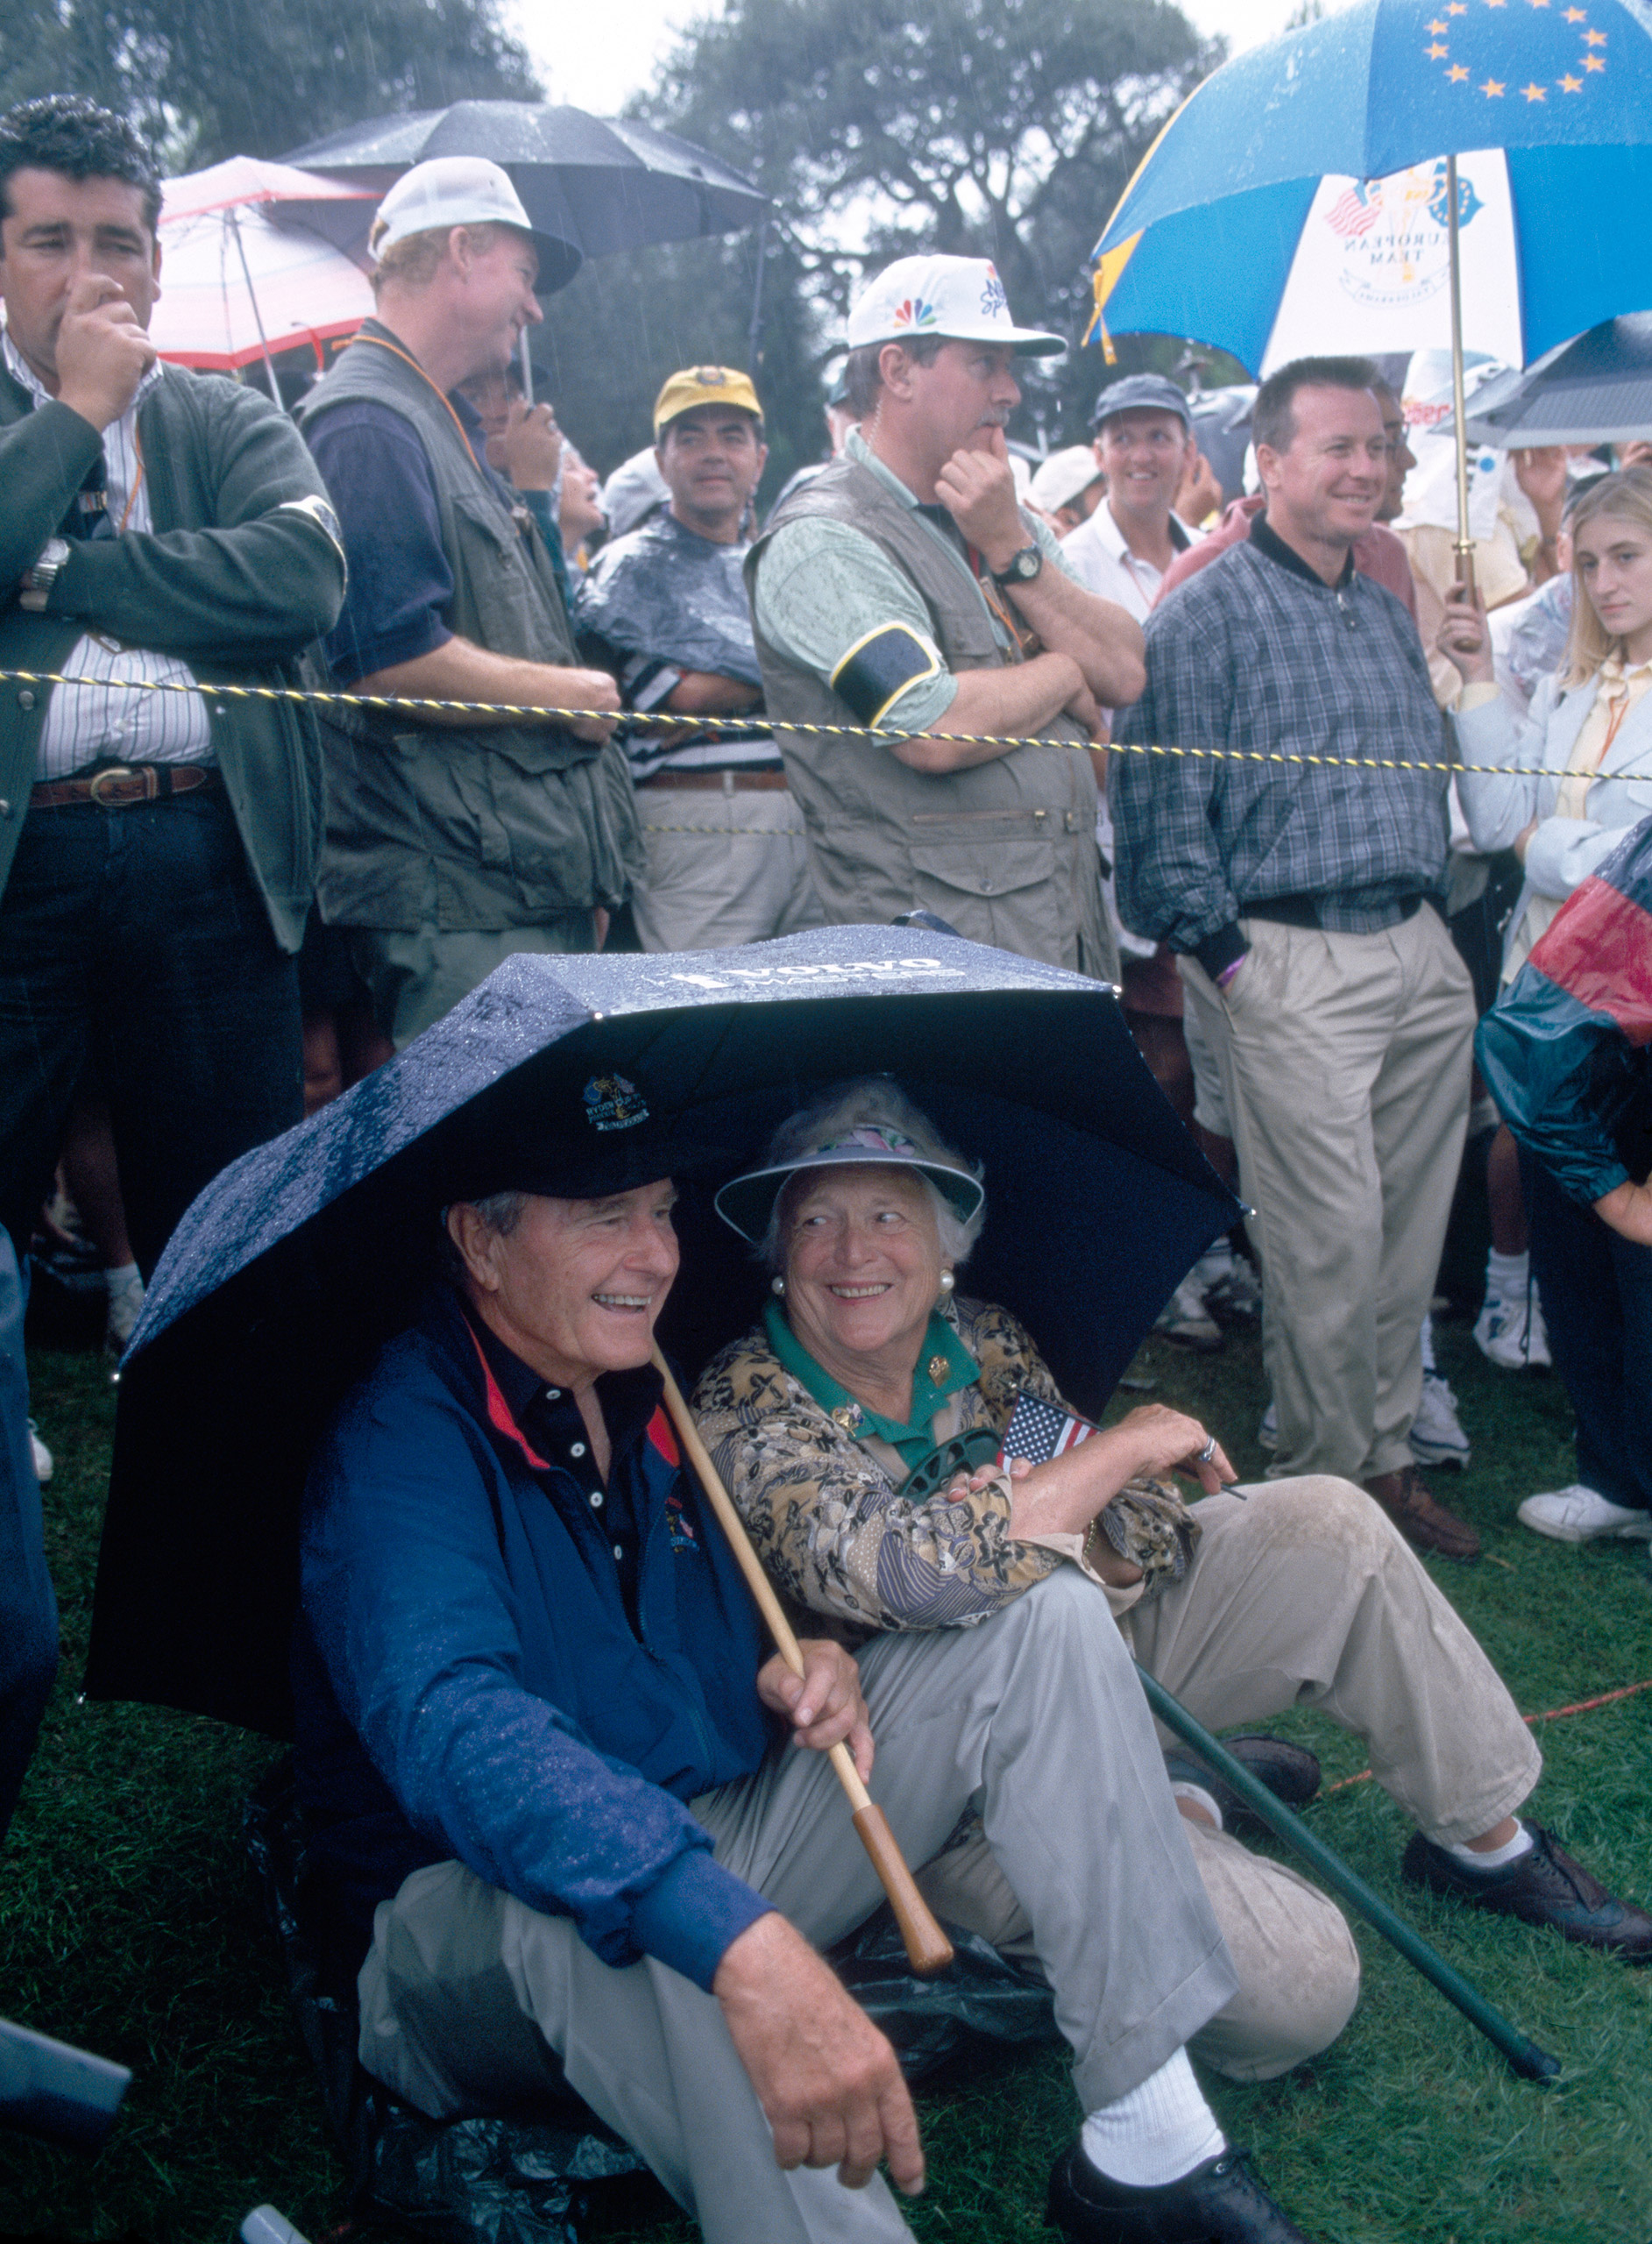 Former United States President George H.W. Bush and his wife Barbara shelter from the rain during the Ryder Cup golf competition held at the Valderrama Golf Club, Spain, Sept. 26, 1997.